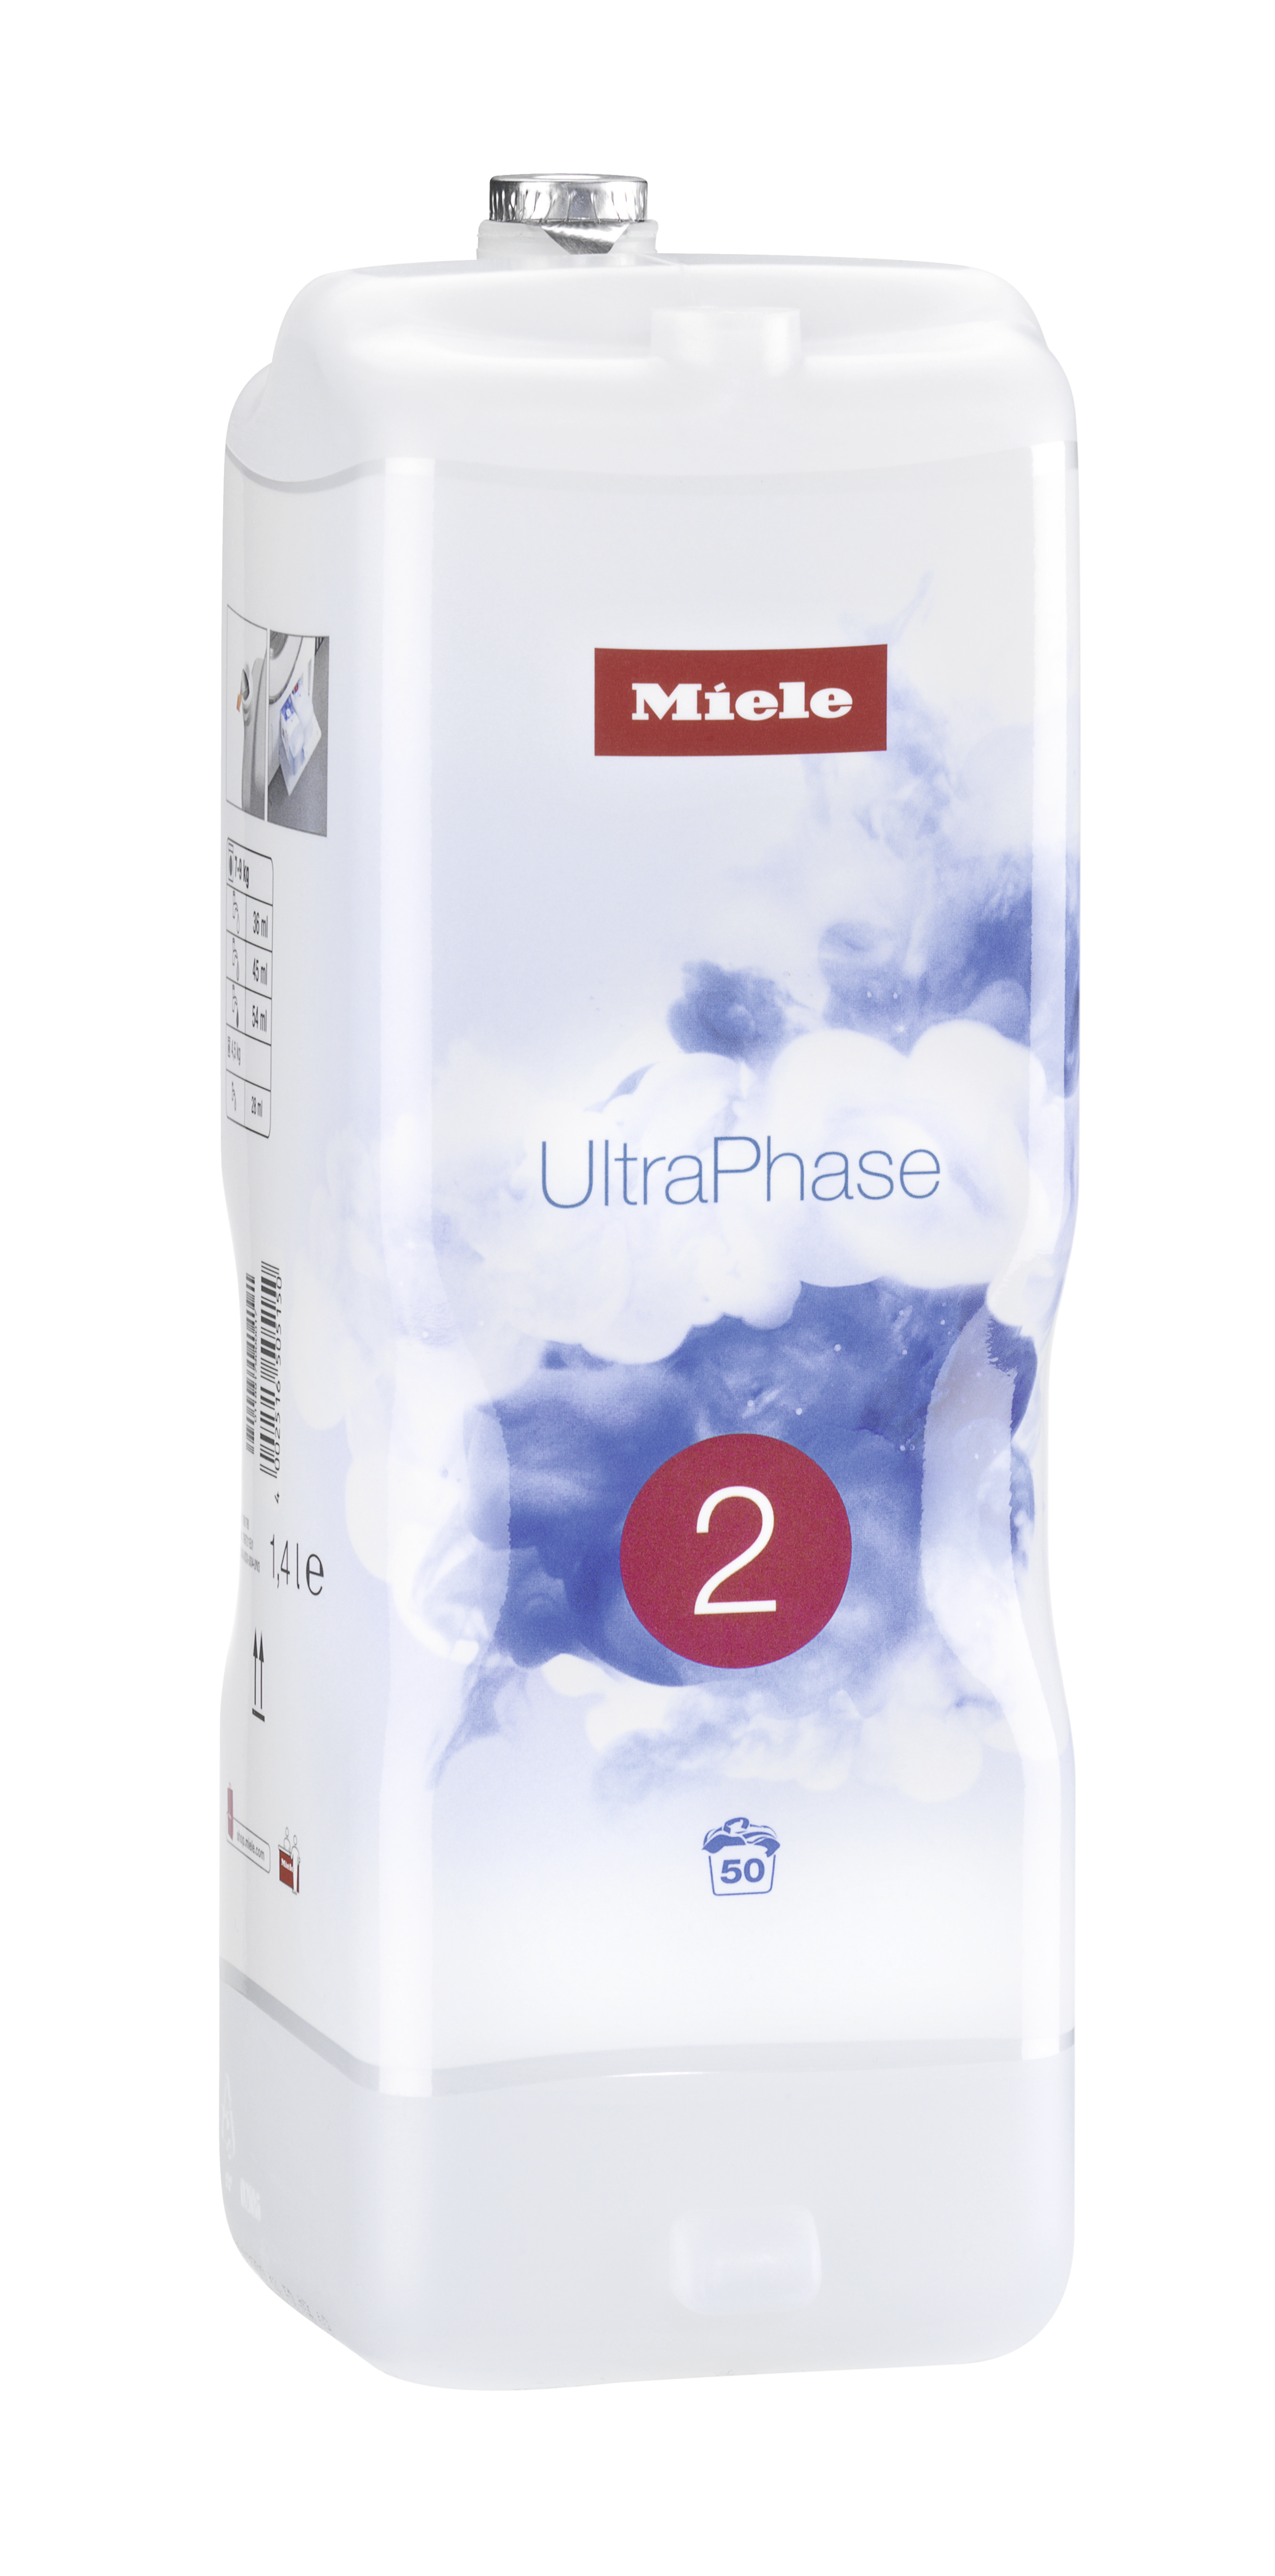 DISC_WA UP2 1401 L Miele UltraPhase 2 detergent product photo